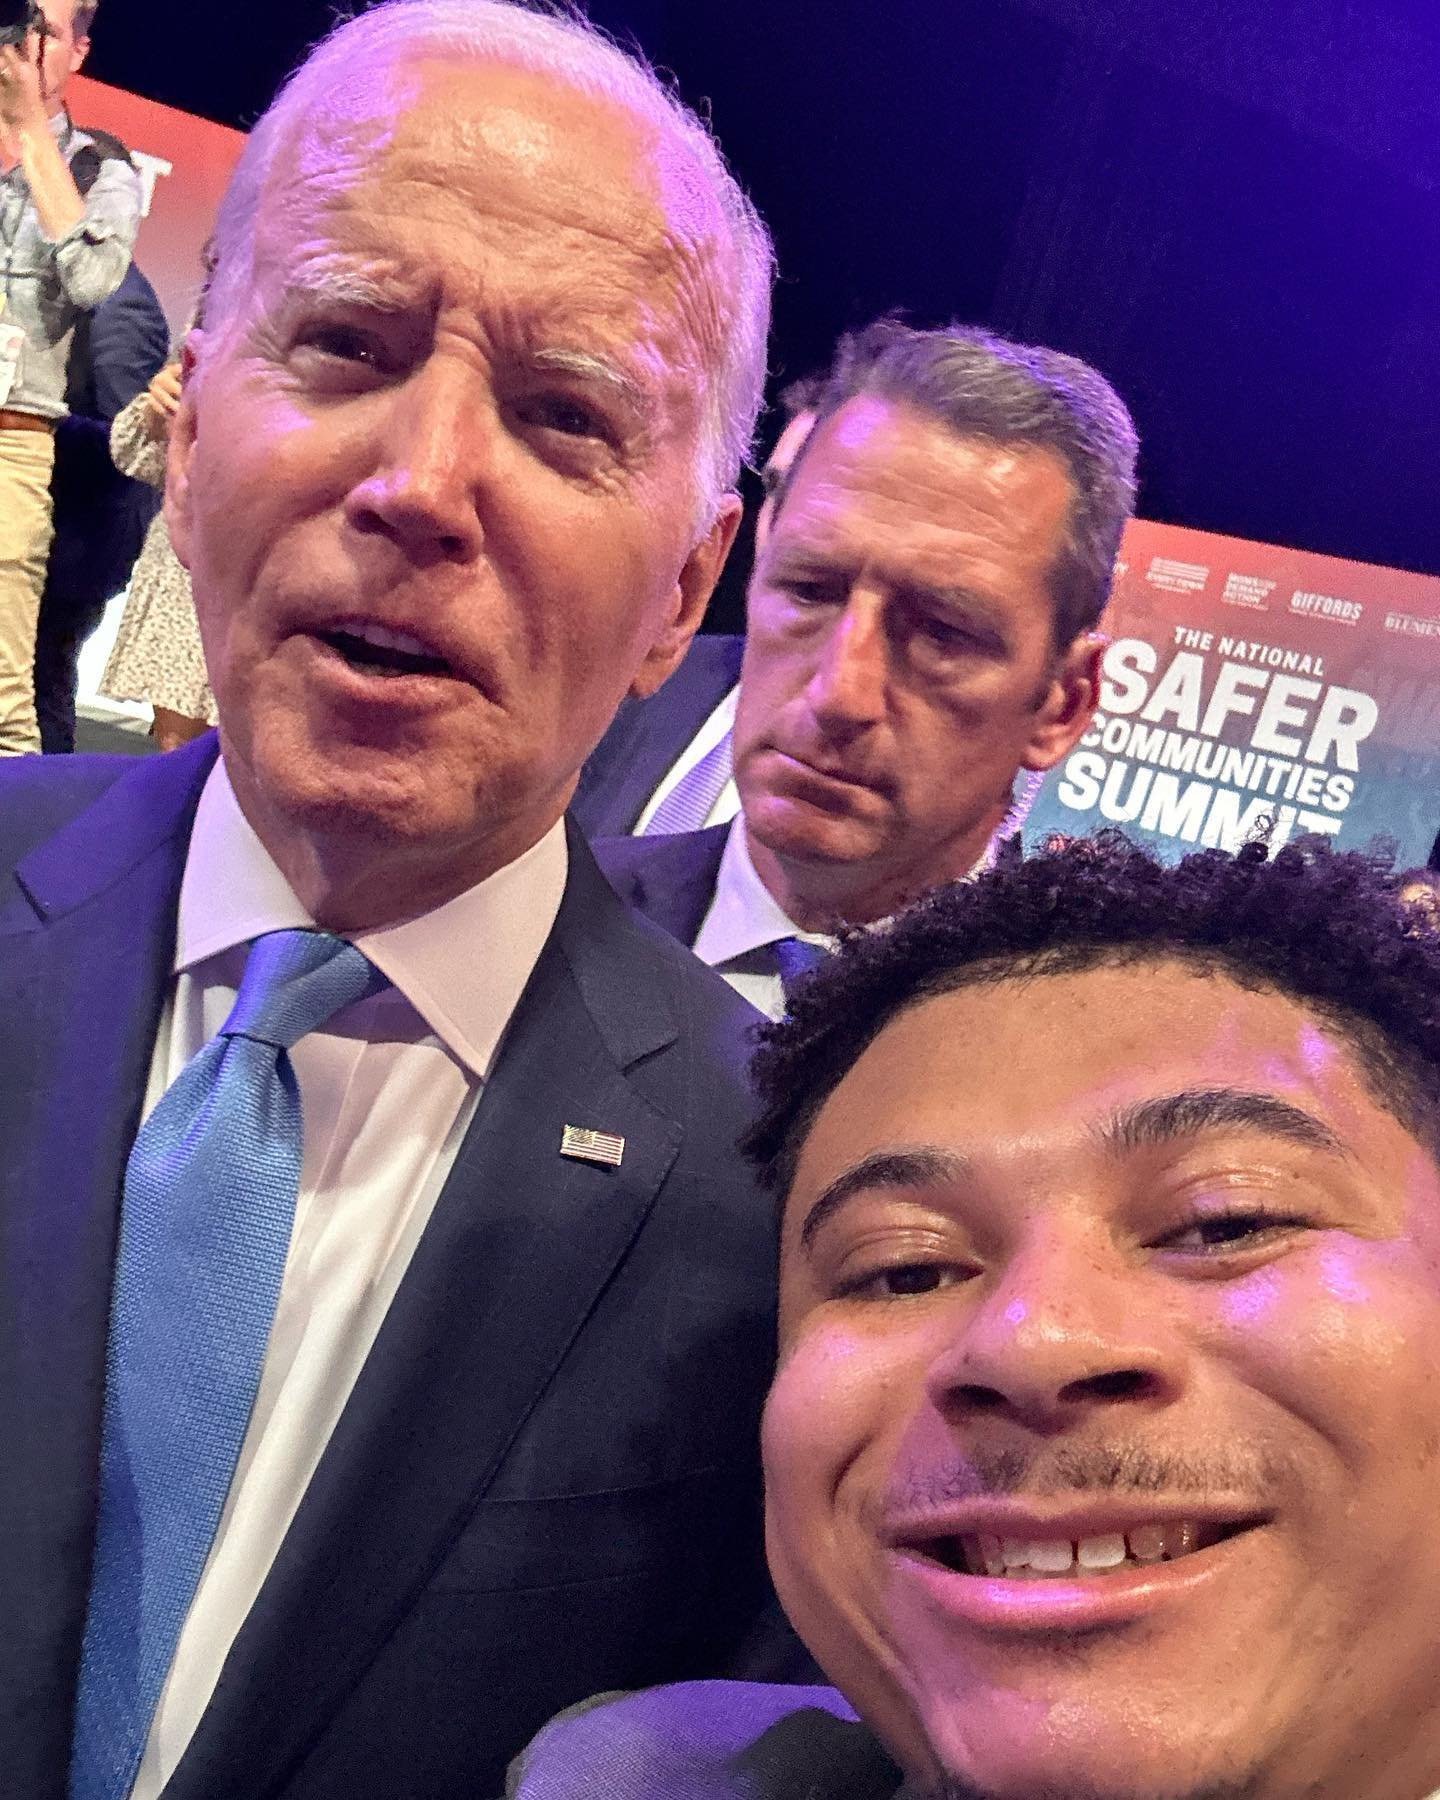 Amazing event at the first National Safer Communities Summit! I got the opportunity to meet and take a picture with the President Biden. 

I also had the opportunity to meet other leaders and lawmakers like Congresswoman Jahana Hayes,  Congresswoman 